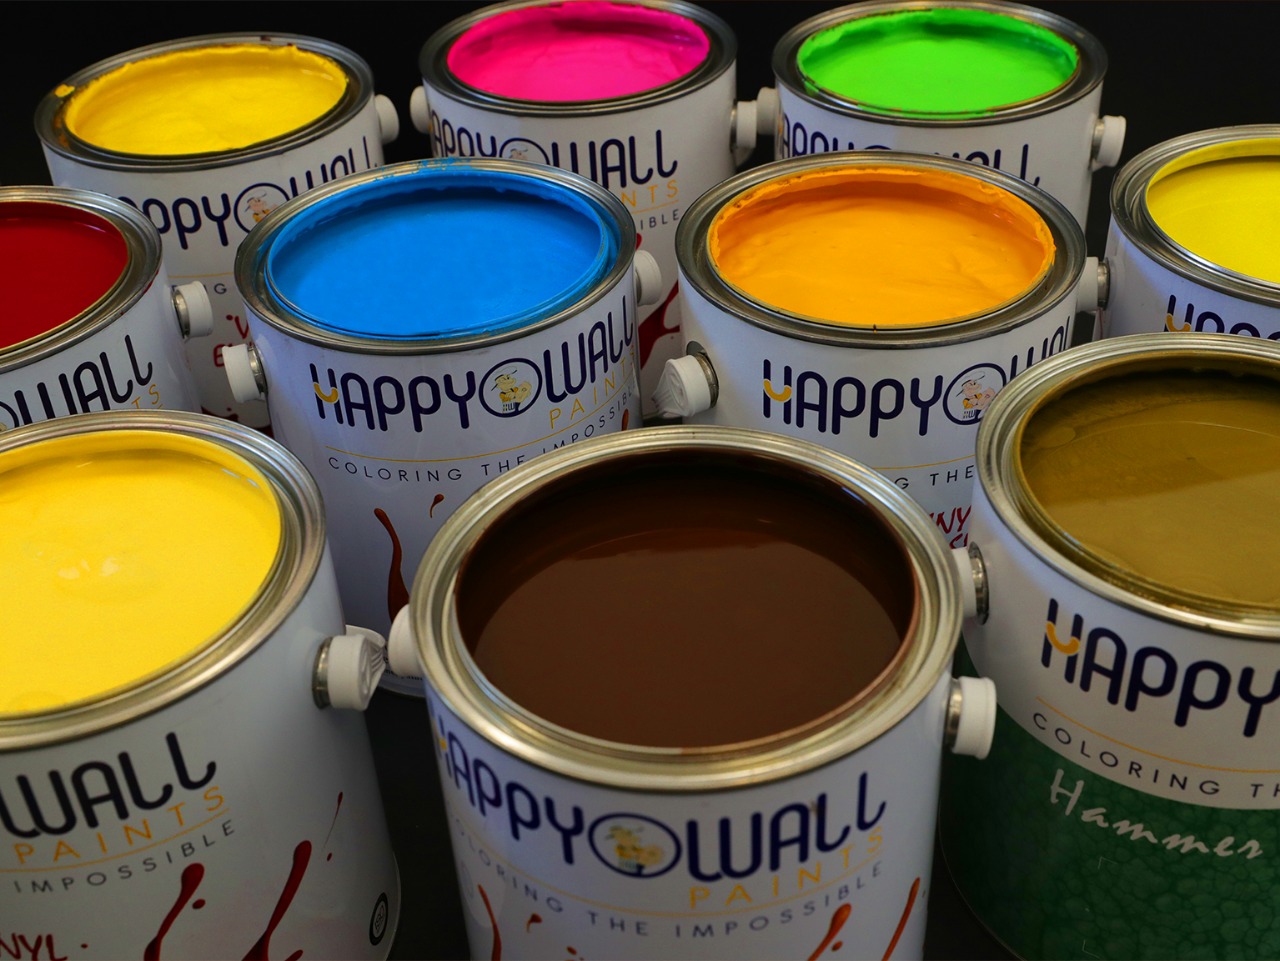 Happy Wall decorative & protective coatings for walls & floorings